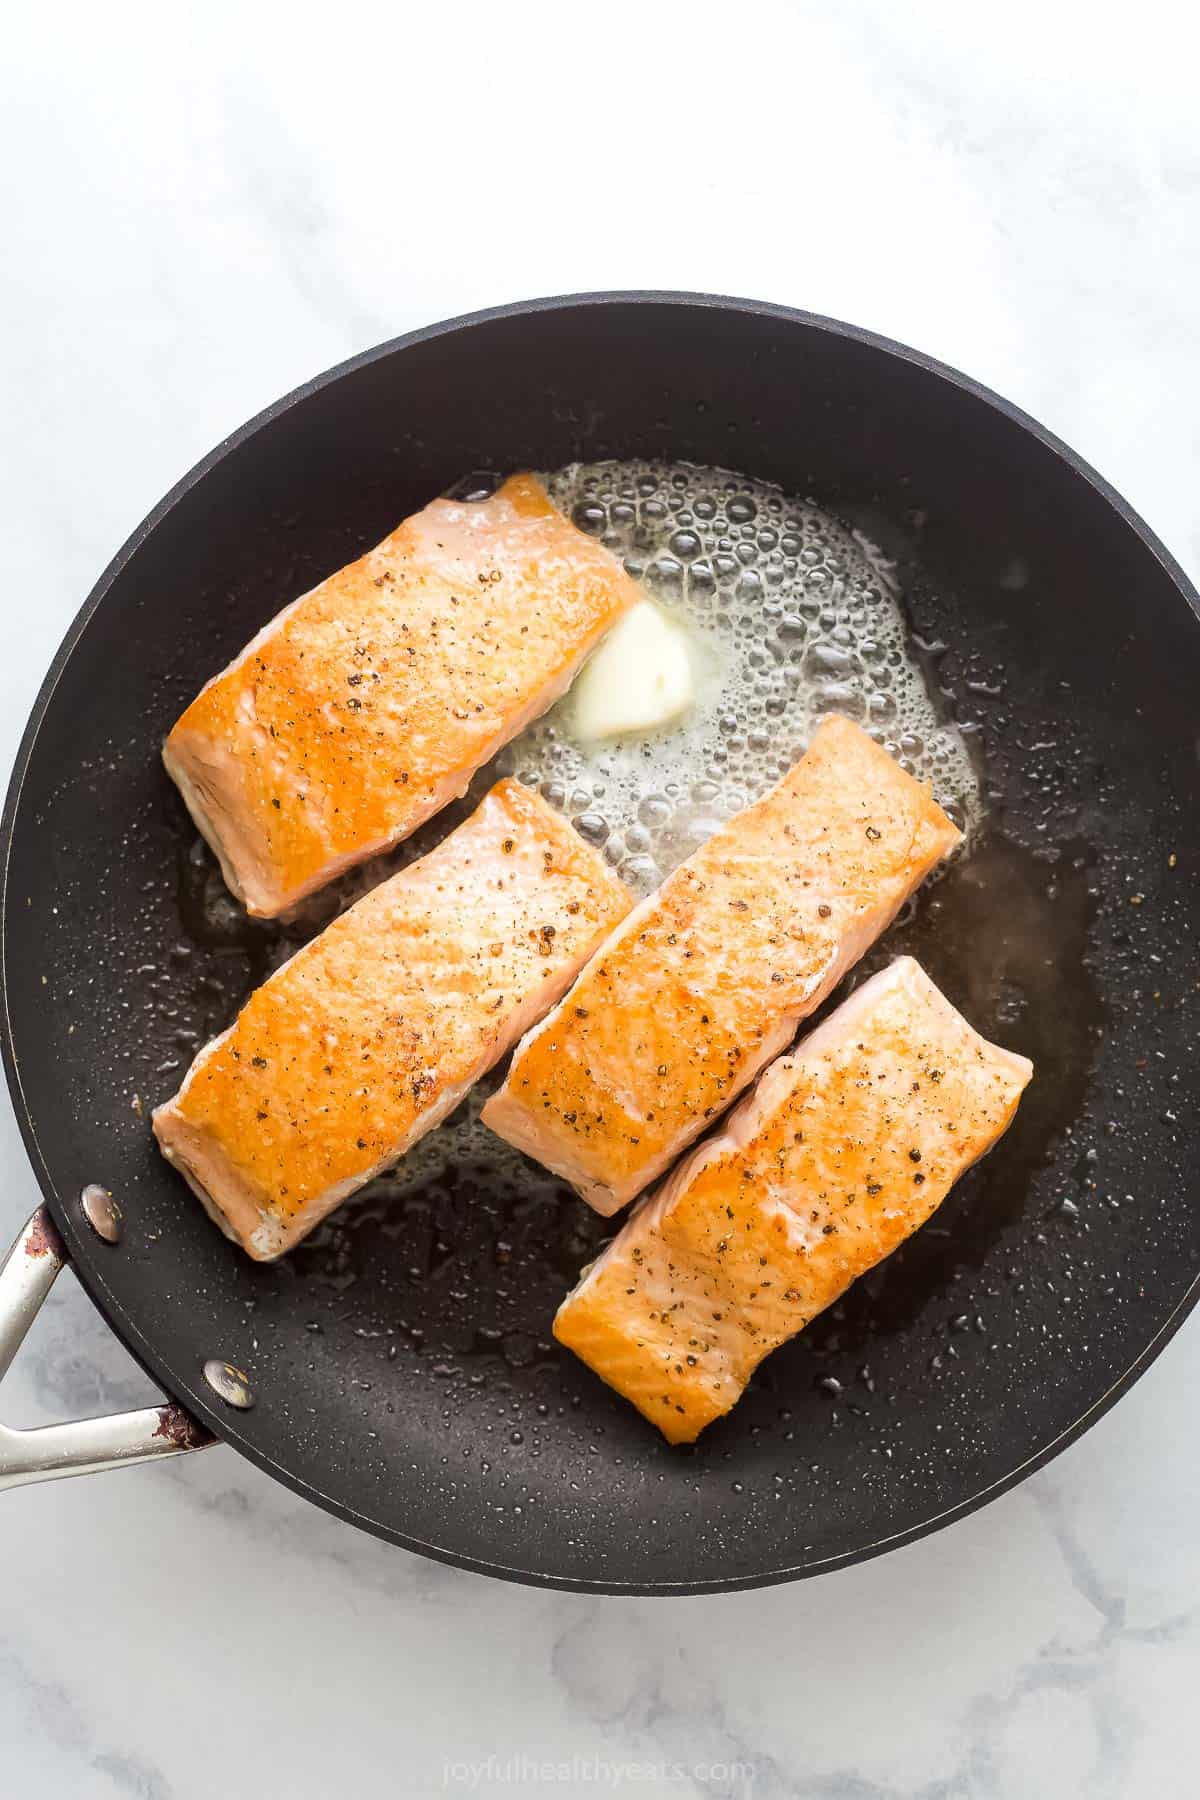 Flipping the salmon and adding the ،er to the pan.